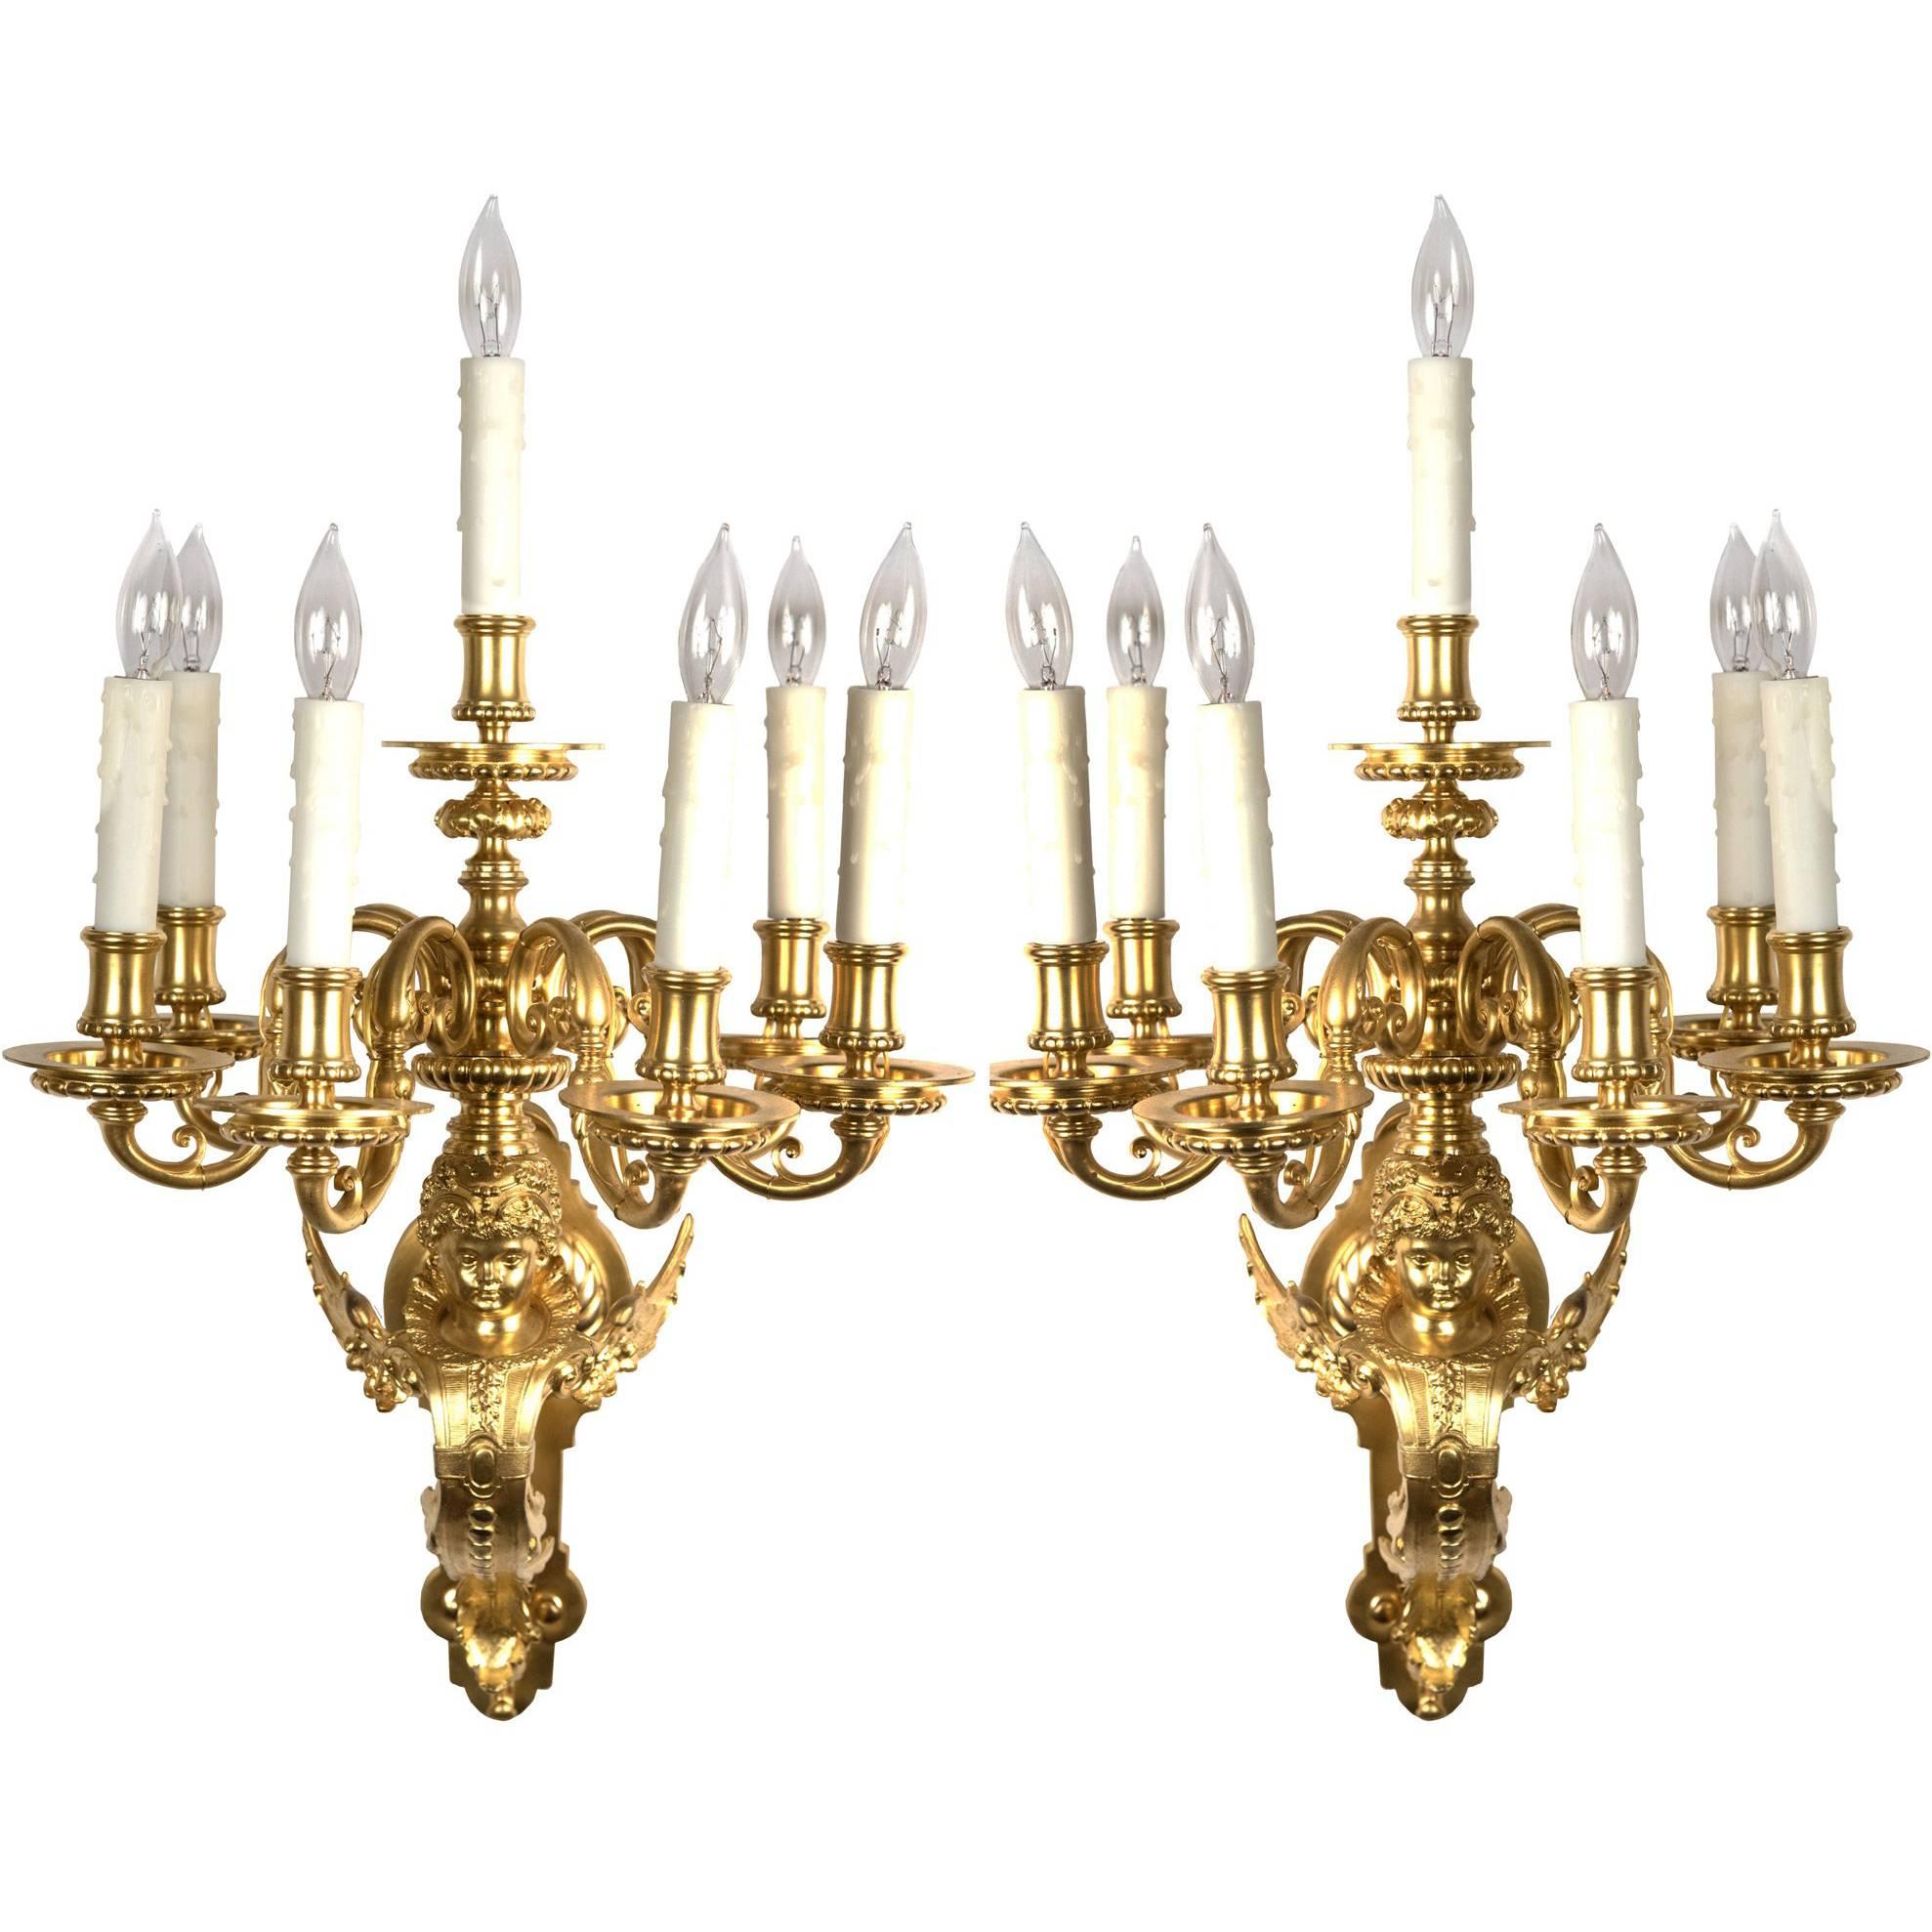 A pair of French Beaux Arts Ormolu Sconces